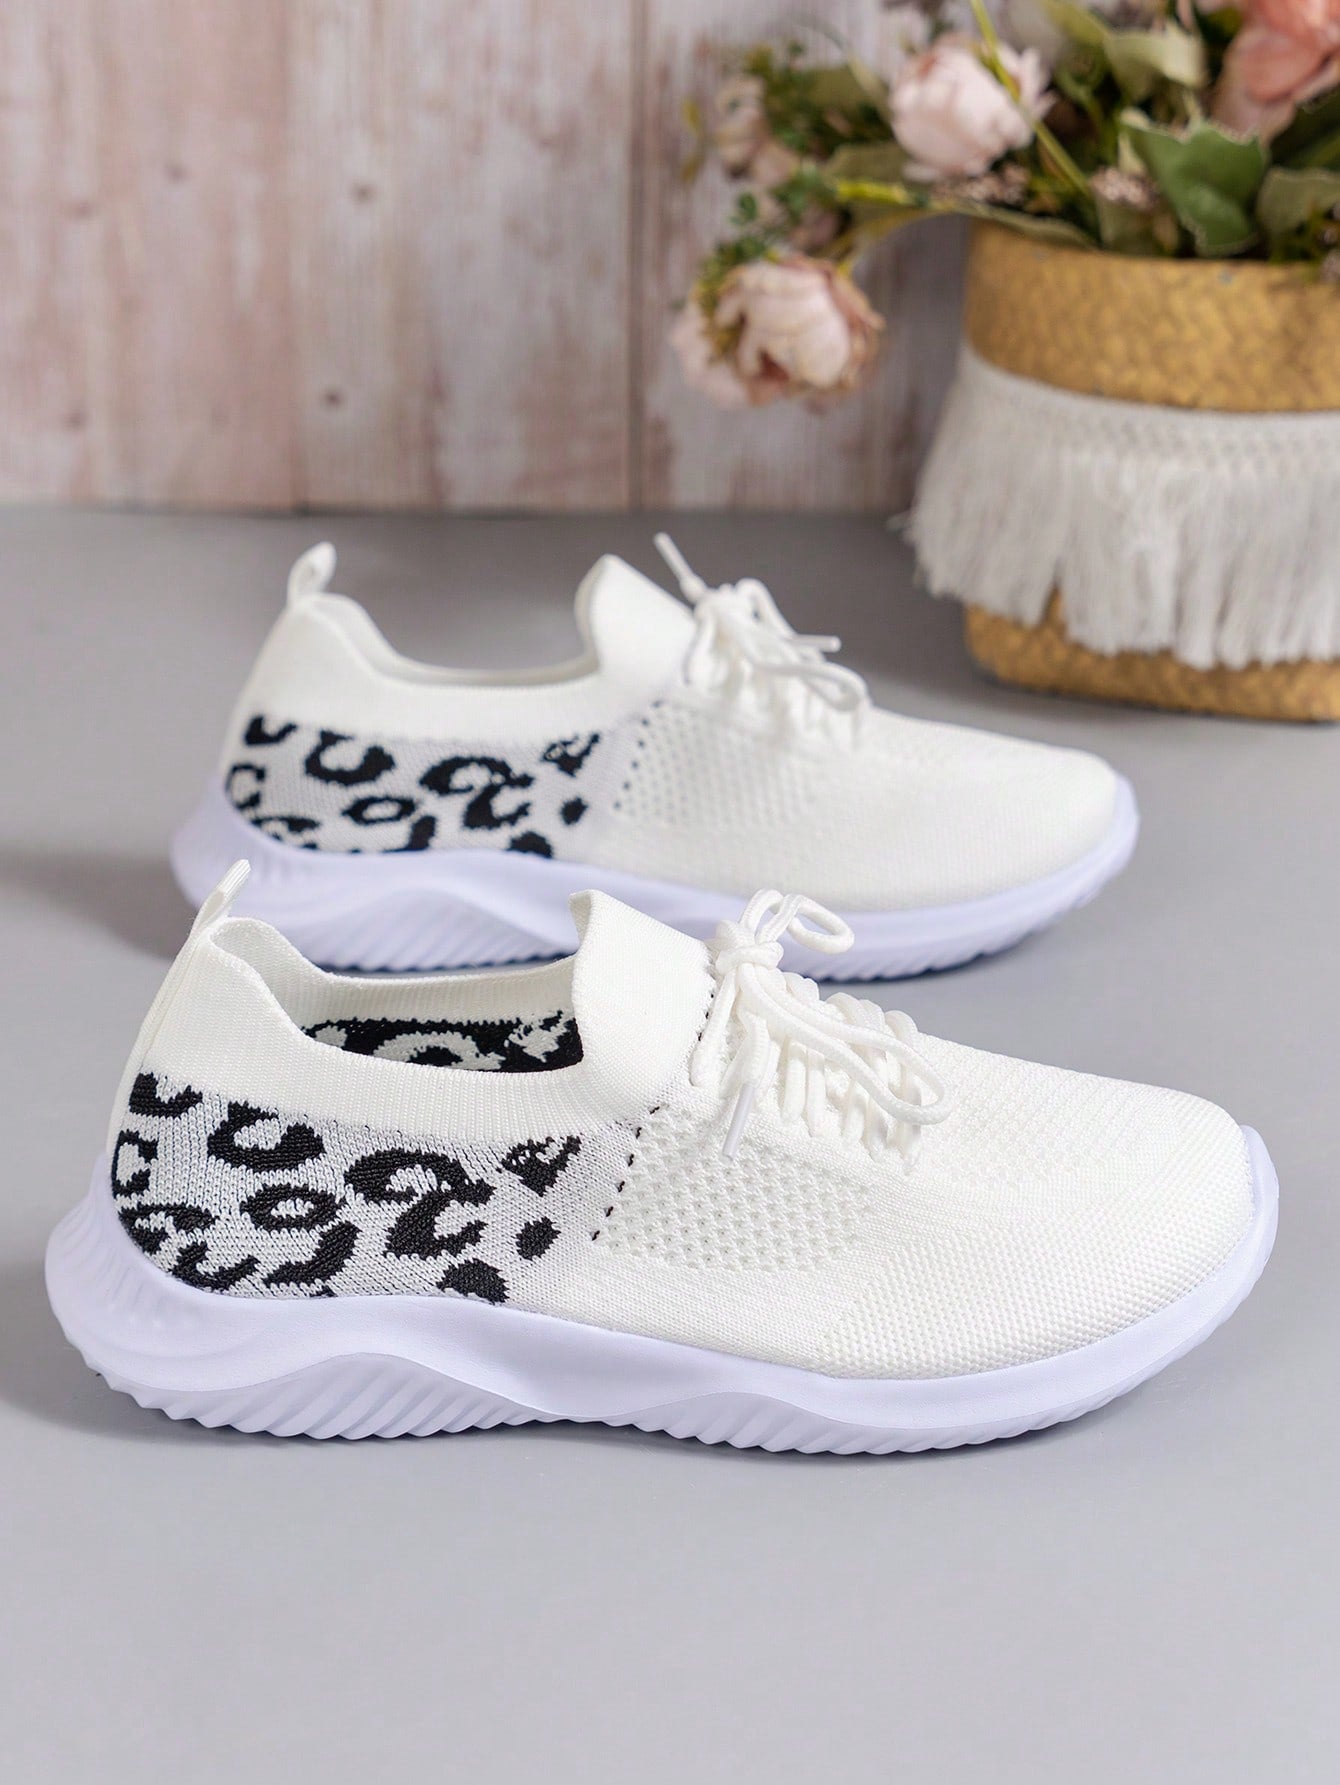 Women's Light And Soft Features Personality Beautiful High Heels Thick Sole Breathable Leopard Print Casual Shoes High Heels Women's Casual Shoes Matching Color Vacation Travel Casual Comfort White Light Comfort Fashion Trend Student Sports Fabric-Black-2